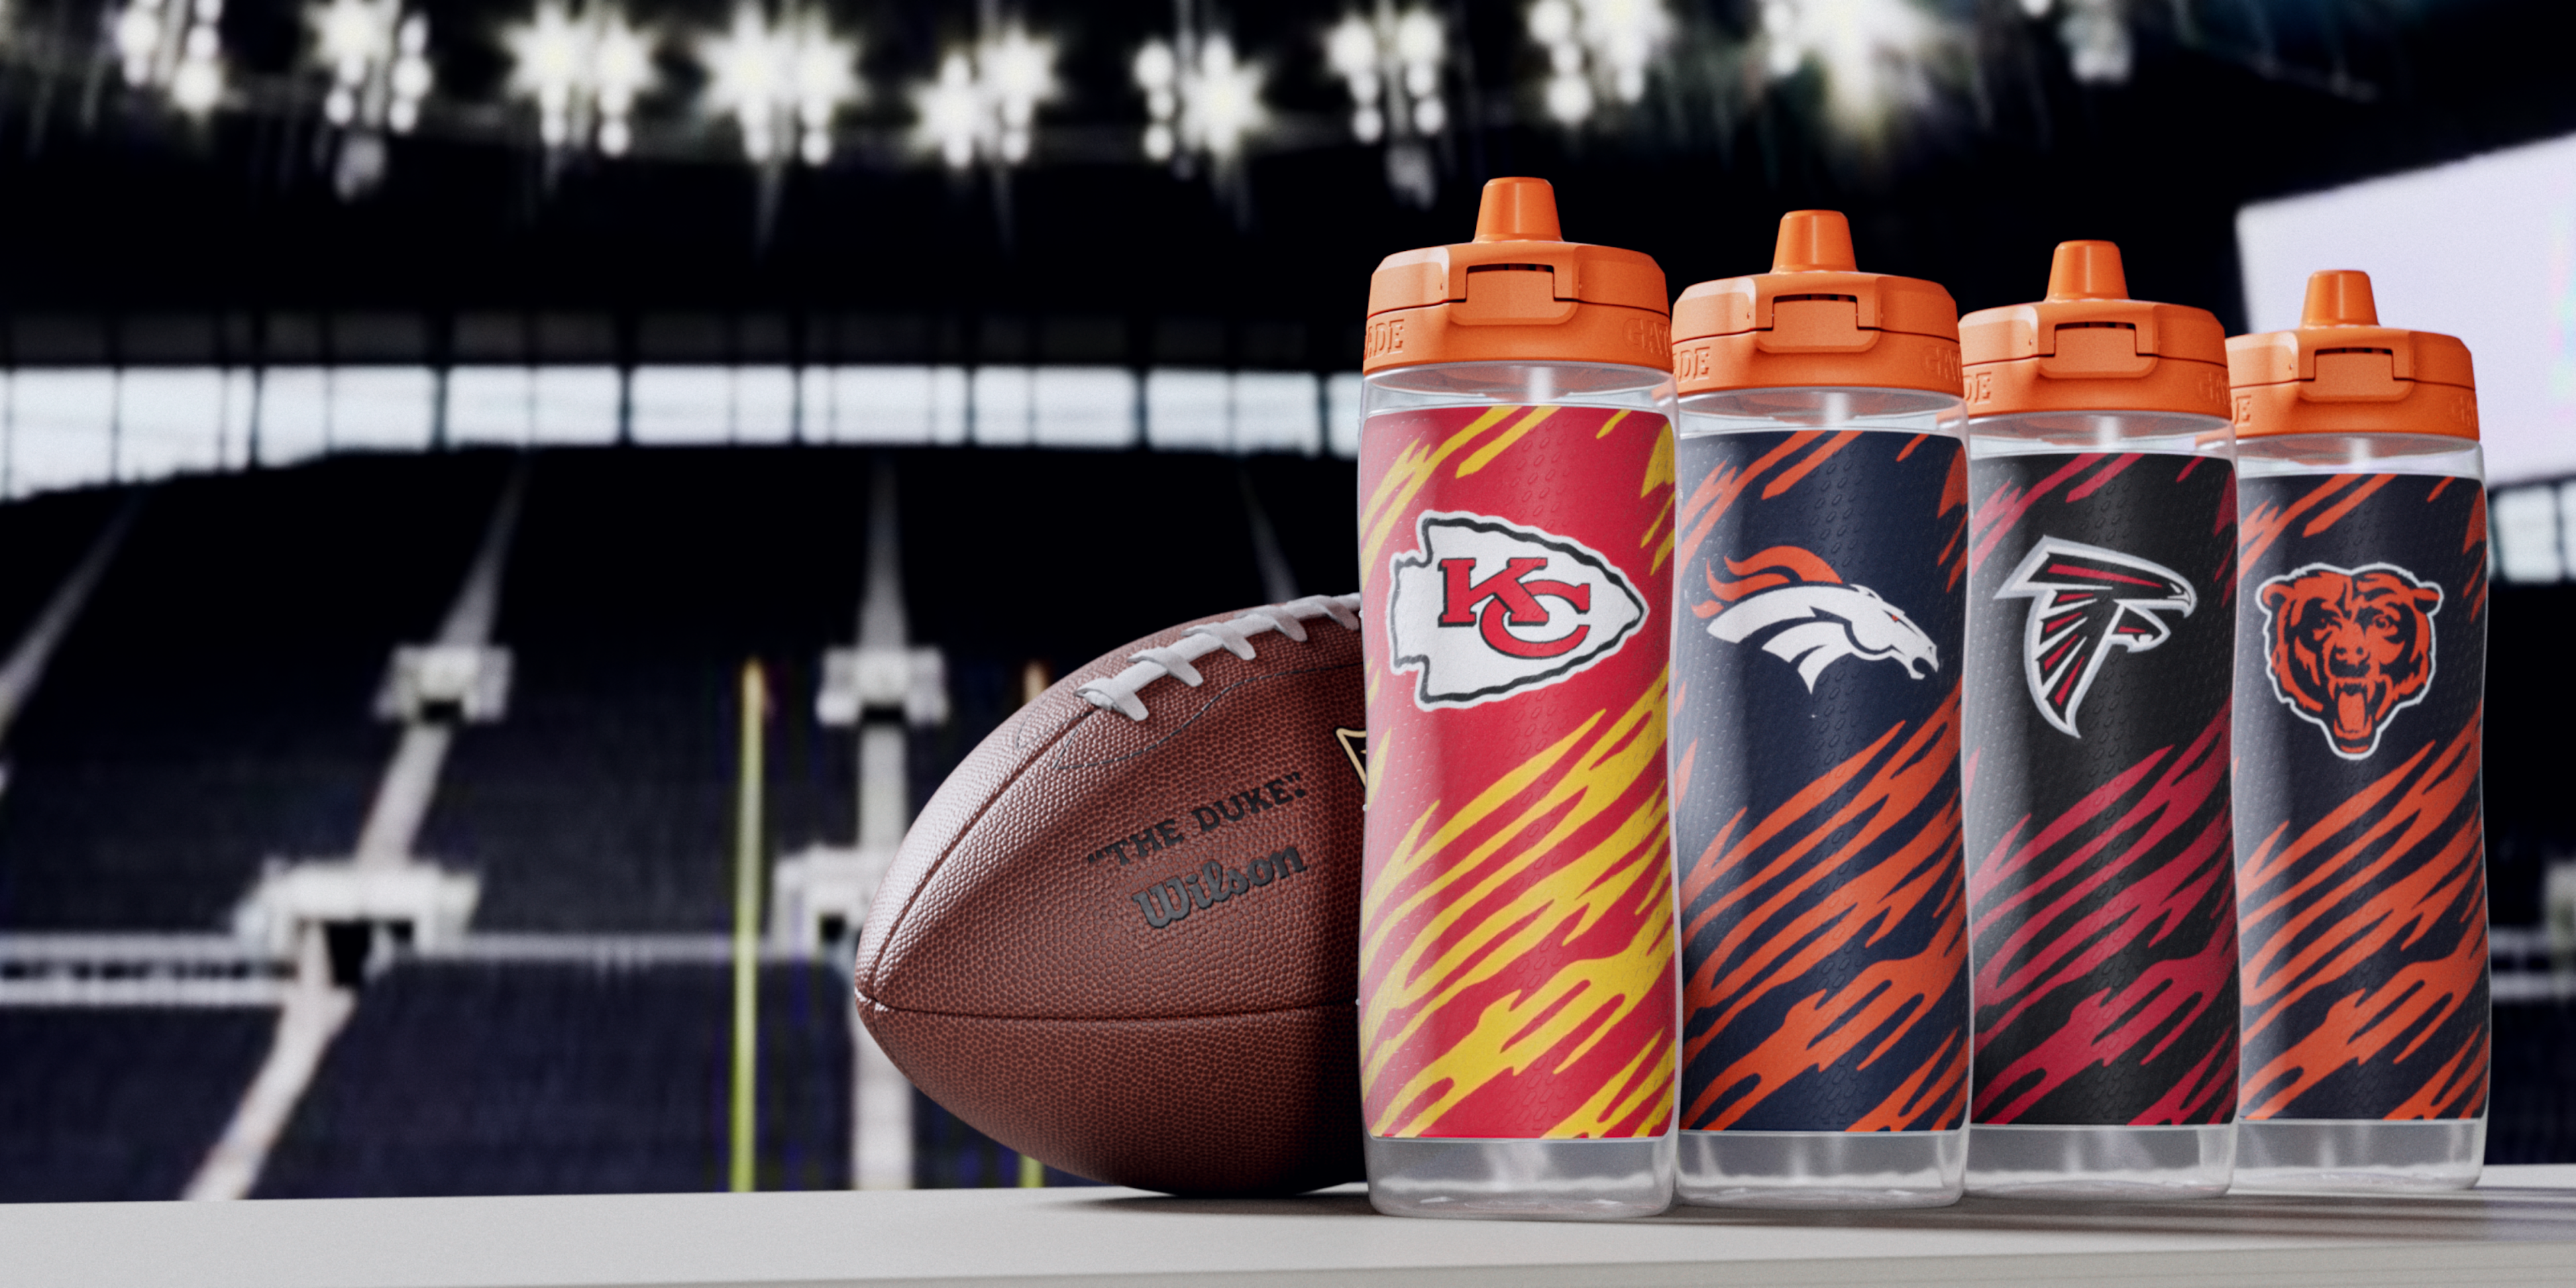 Gx NFL Bottles with team logos next to a football